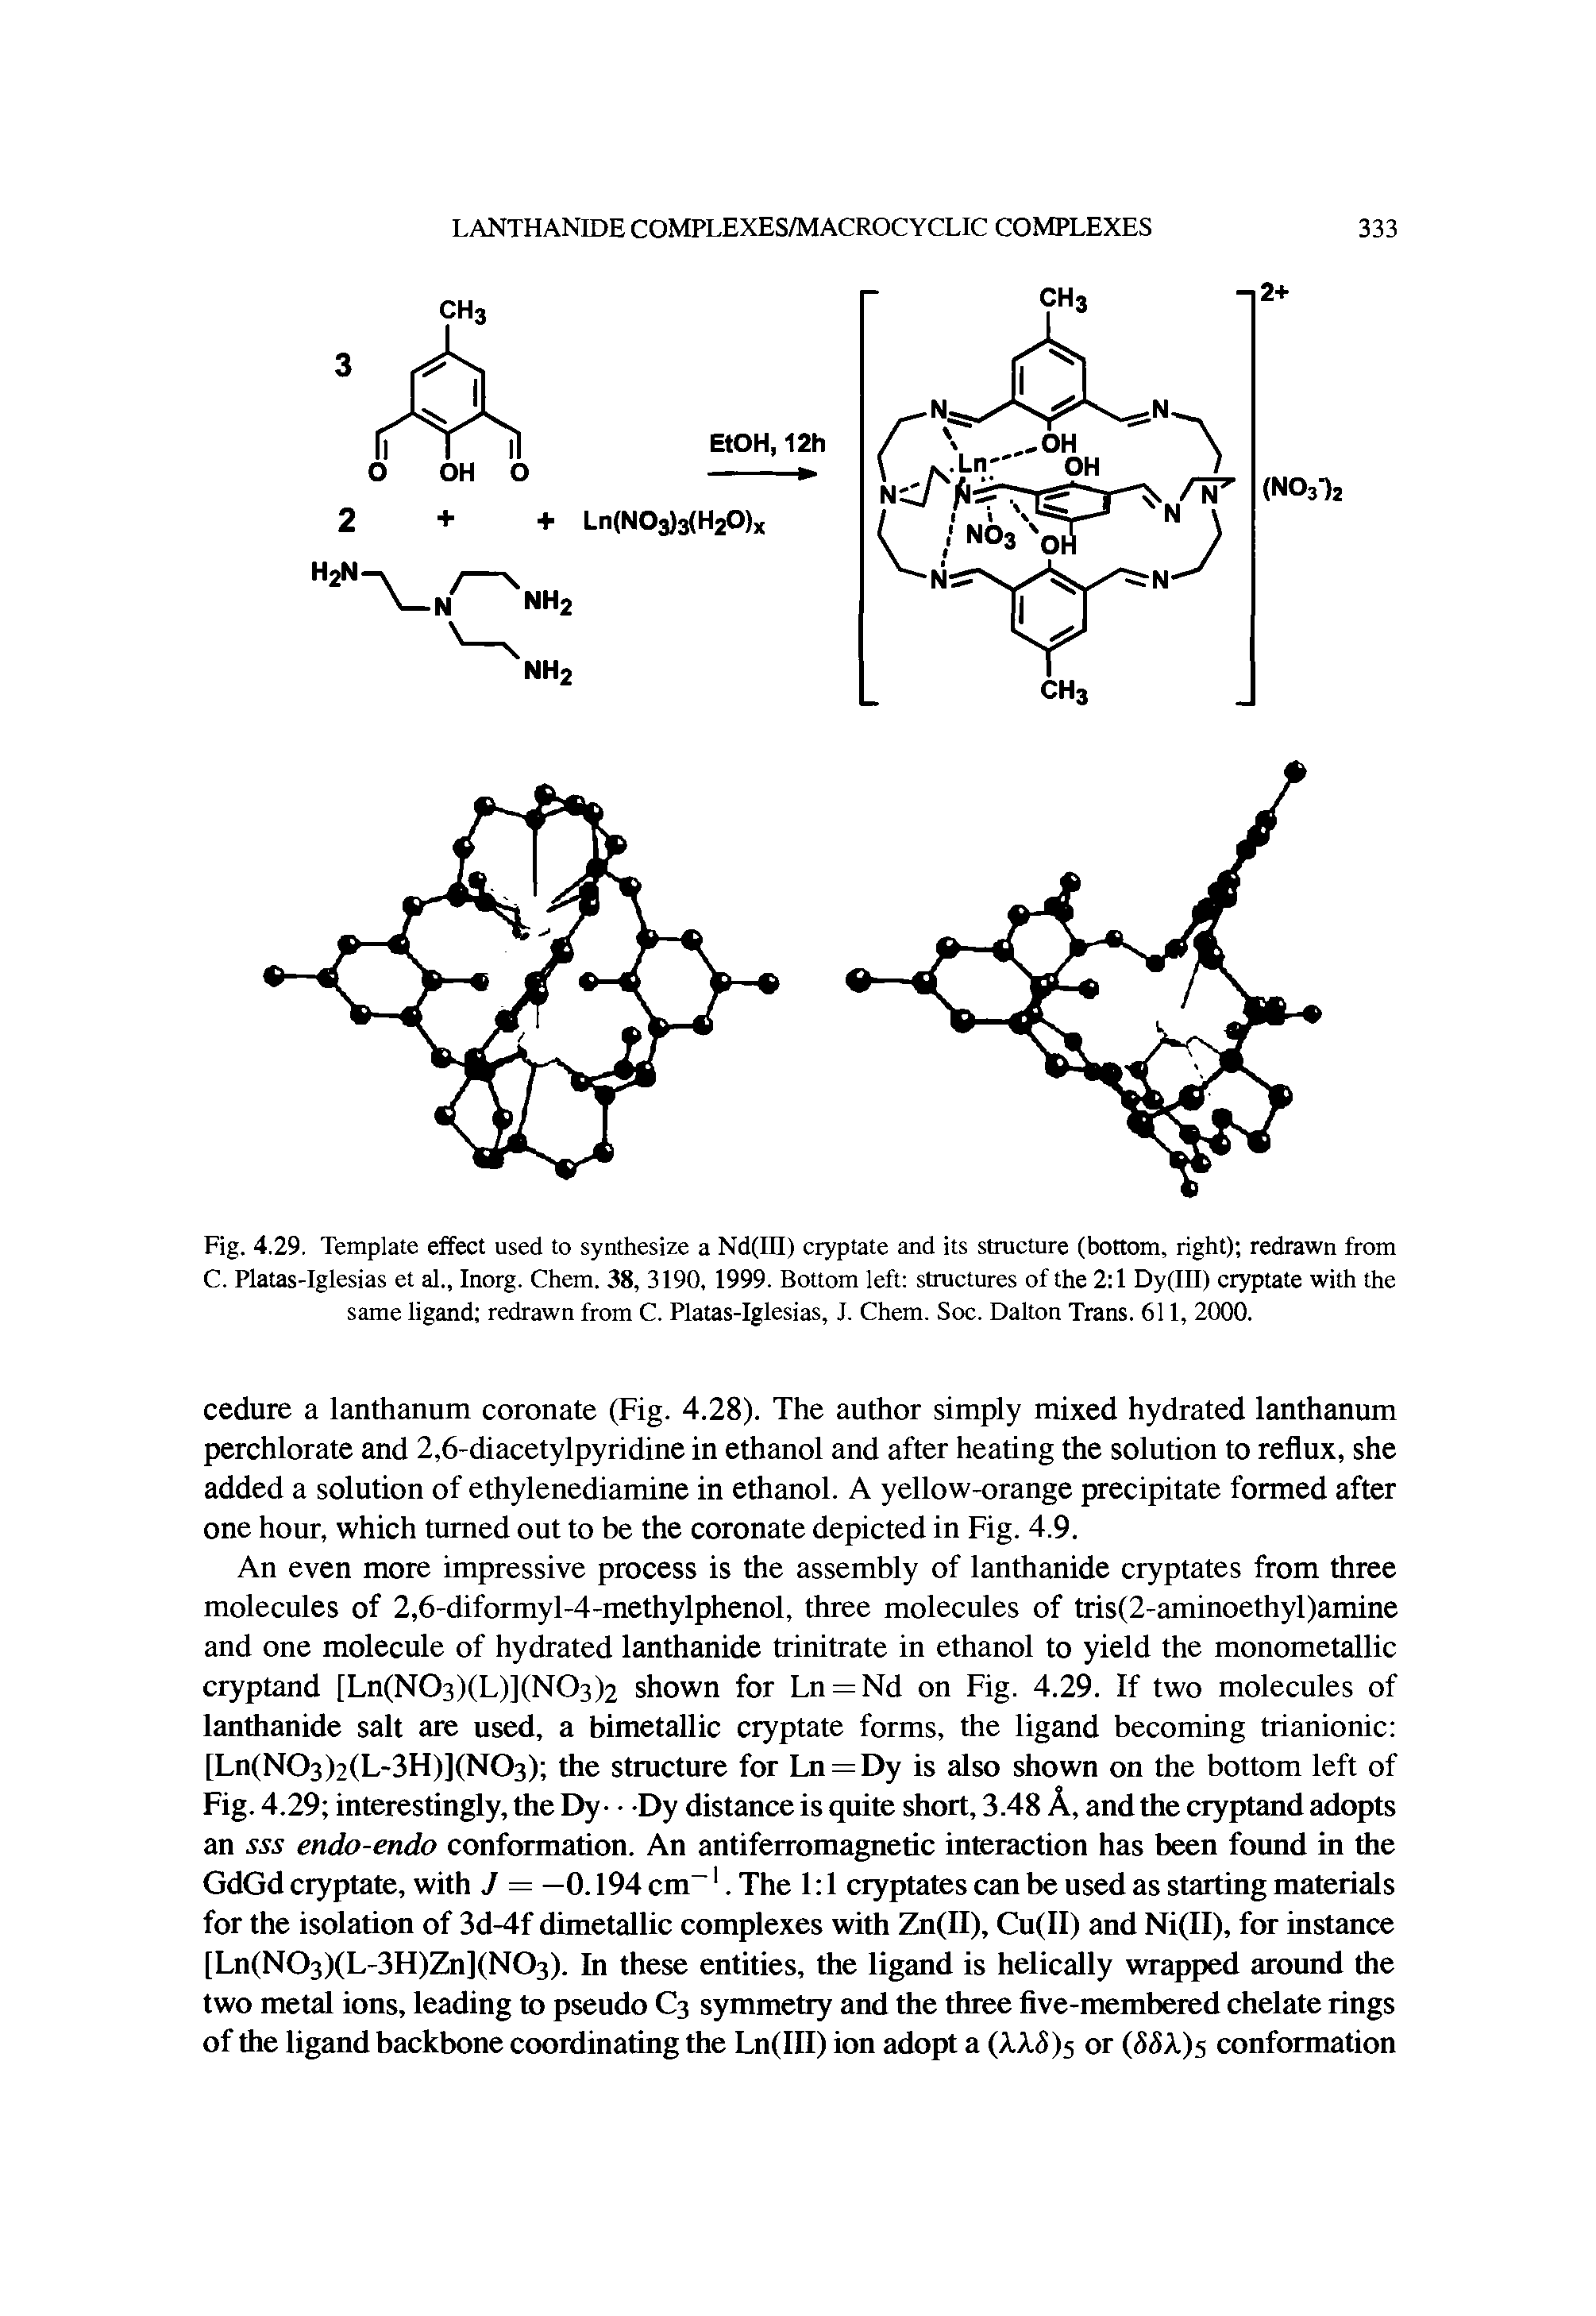 Fig. 4.29. Template effect used to synthesize a Nd(III) cryptate and its structure (bottom, right) redrawn from C. Platas-Iglesias et al., Inorg. Chem. 38, 3190, 1999. Bottom left structures of the 2 1 Dy(III) cryptate with the same ligand redrawn from C. Platas-Iglesias, J. Chem. Soc. Dalton Trans. 611, 2000.